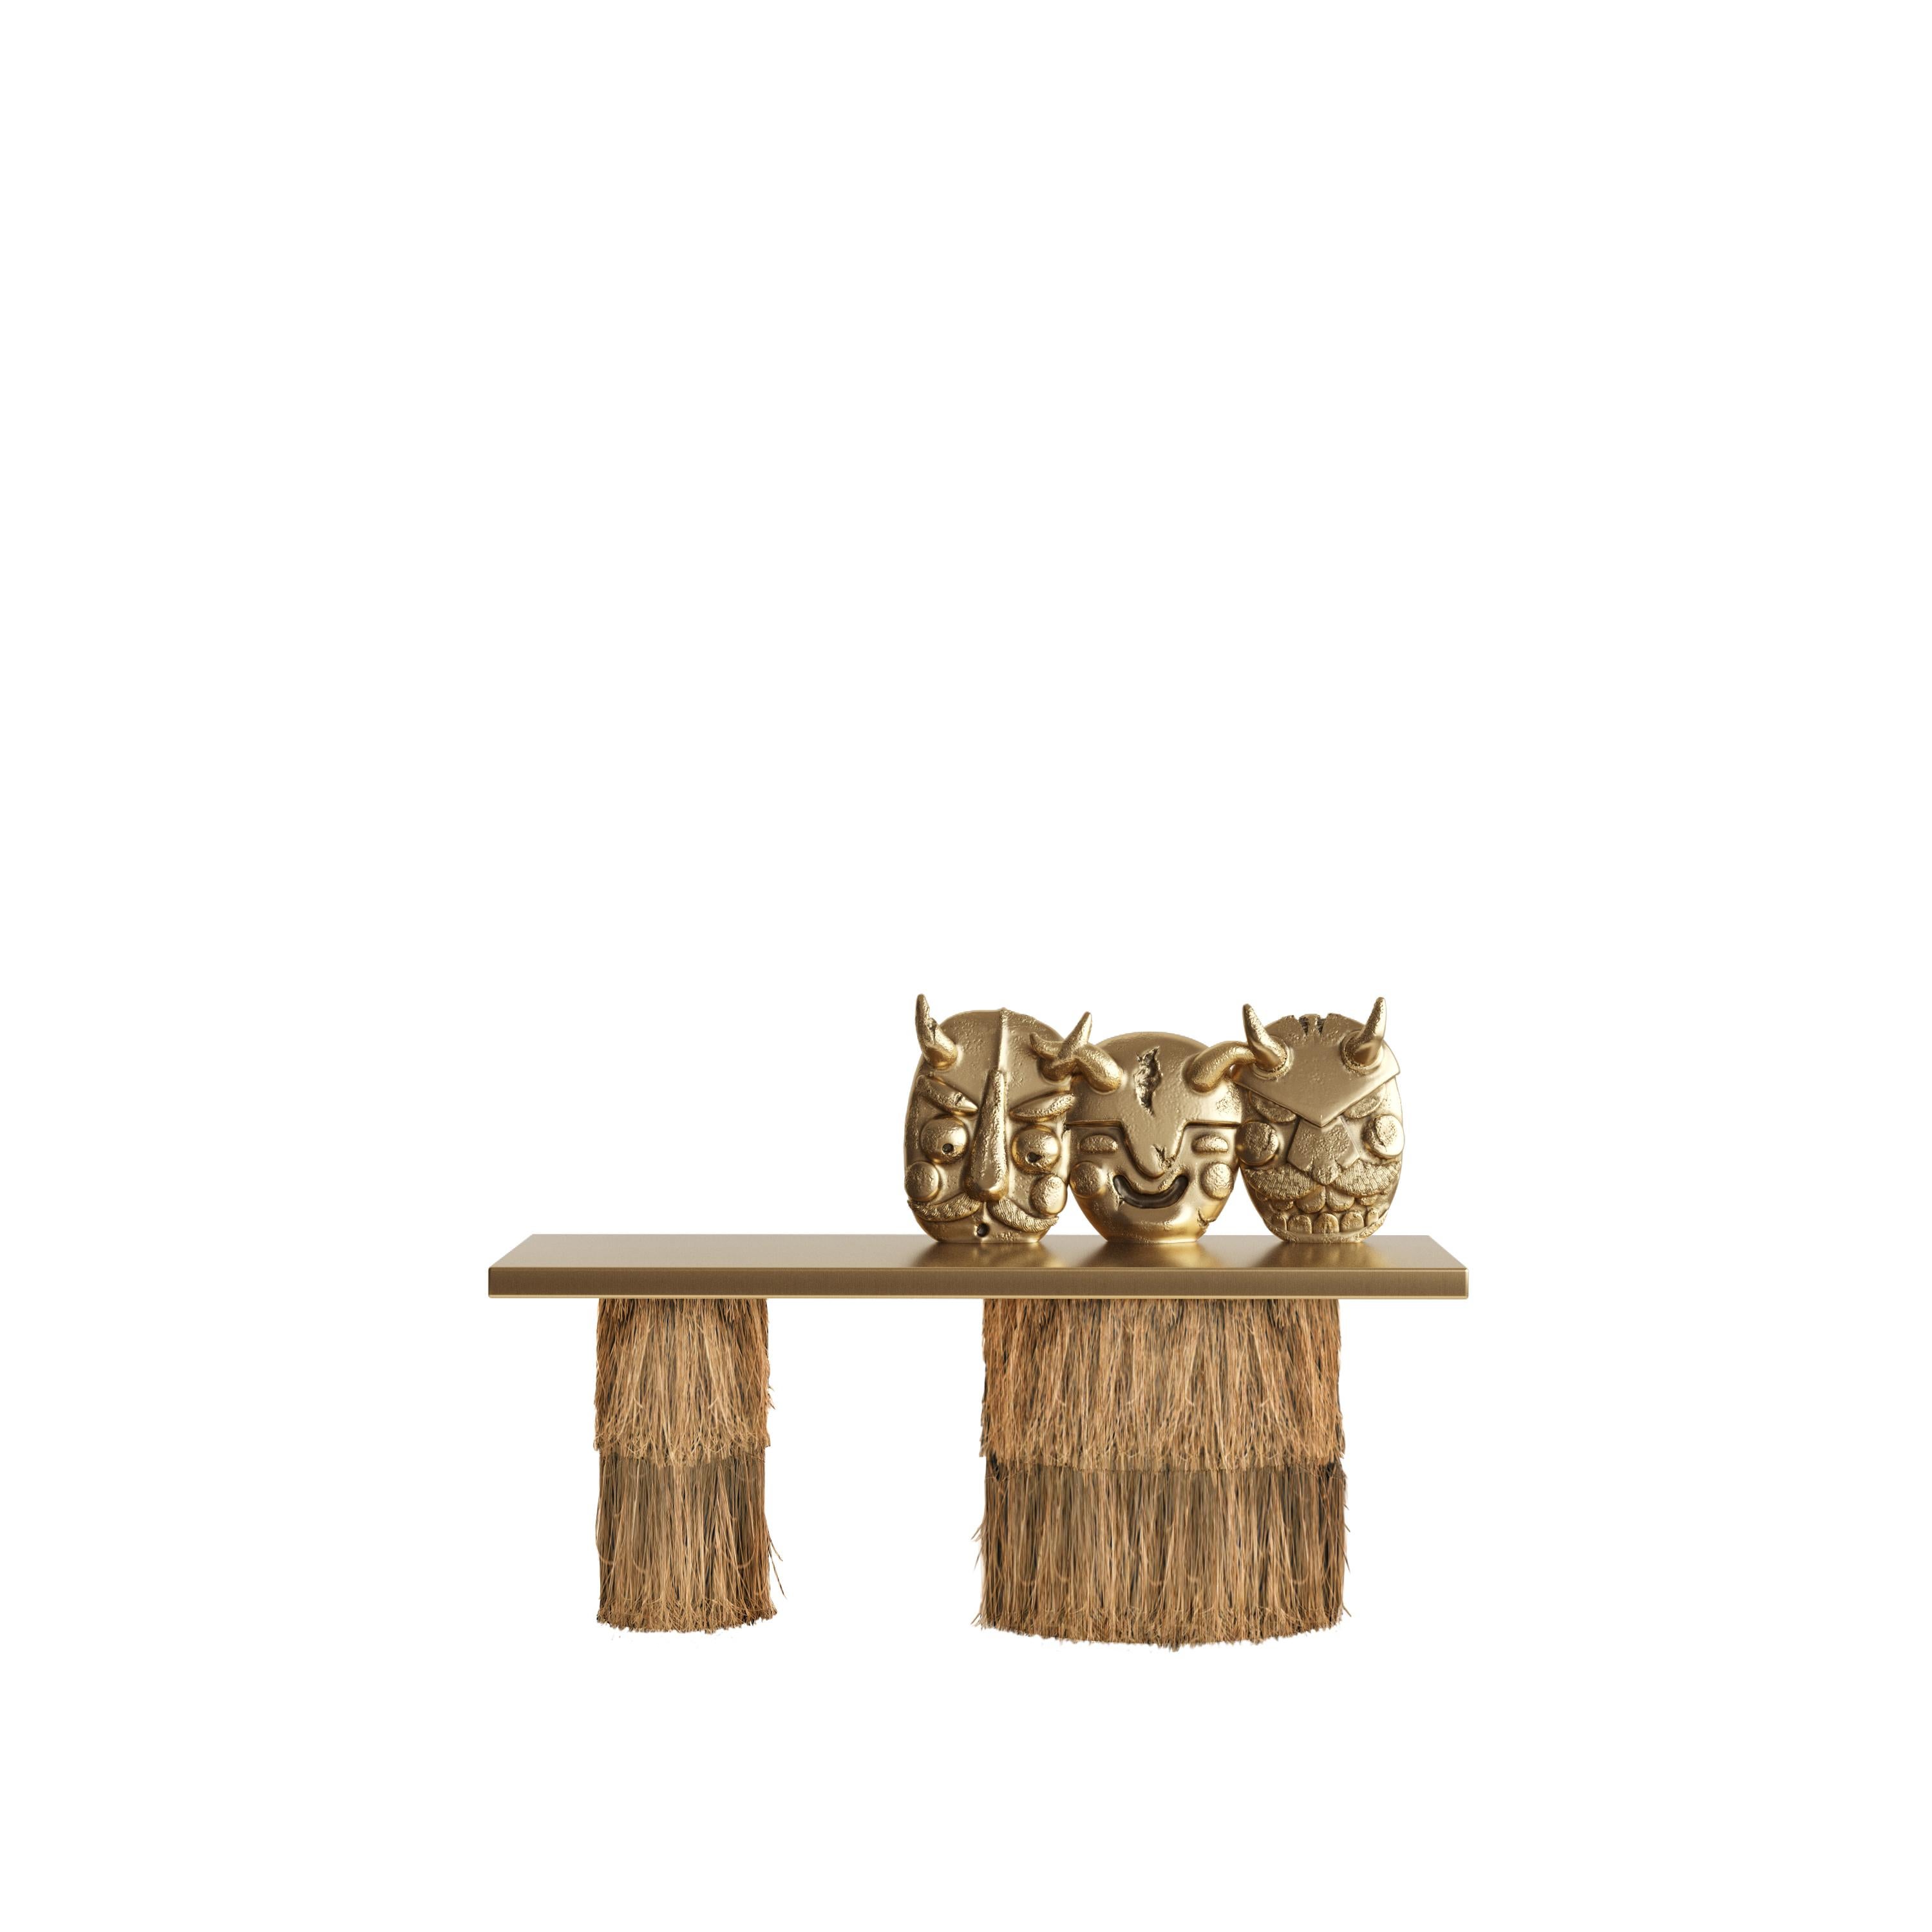 Lazarim Bench by Andre Teoman Studio
Dimensions: W 110 x D 40 x H 45 cm
Materials: Bronze, Rafia

Introducing the Lazarim Collection, a tribute to one of Portugal's most traditional carnivals and its iconic Caretos masks. Celebrating the Entrudo,